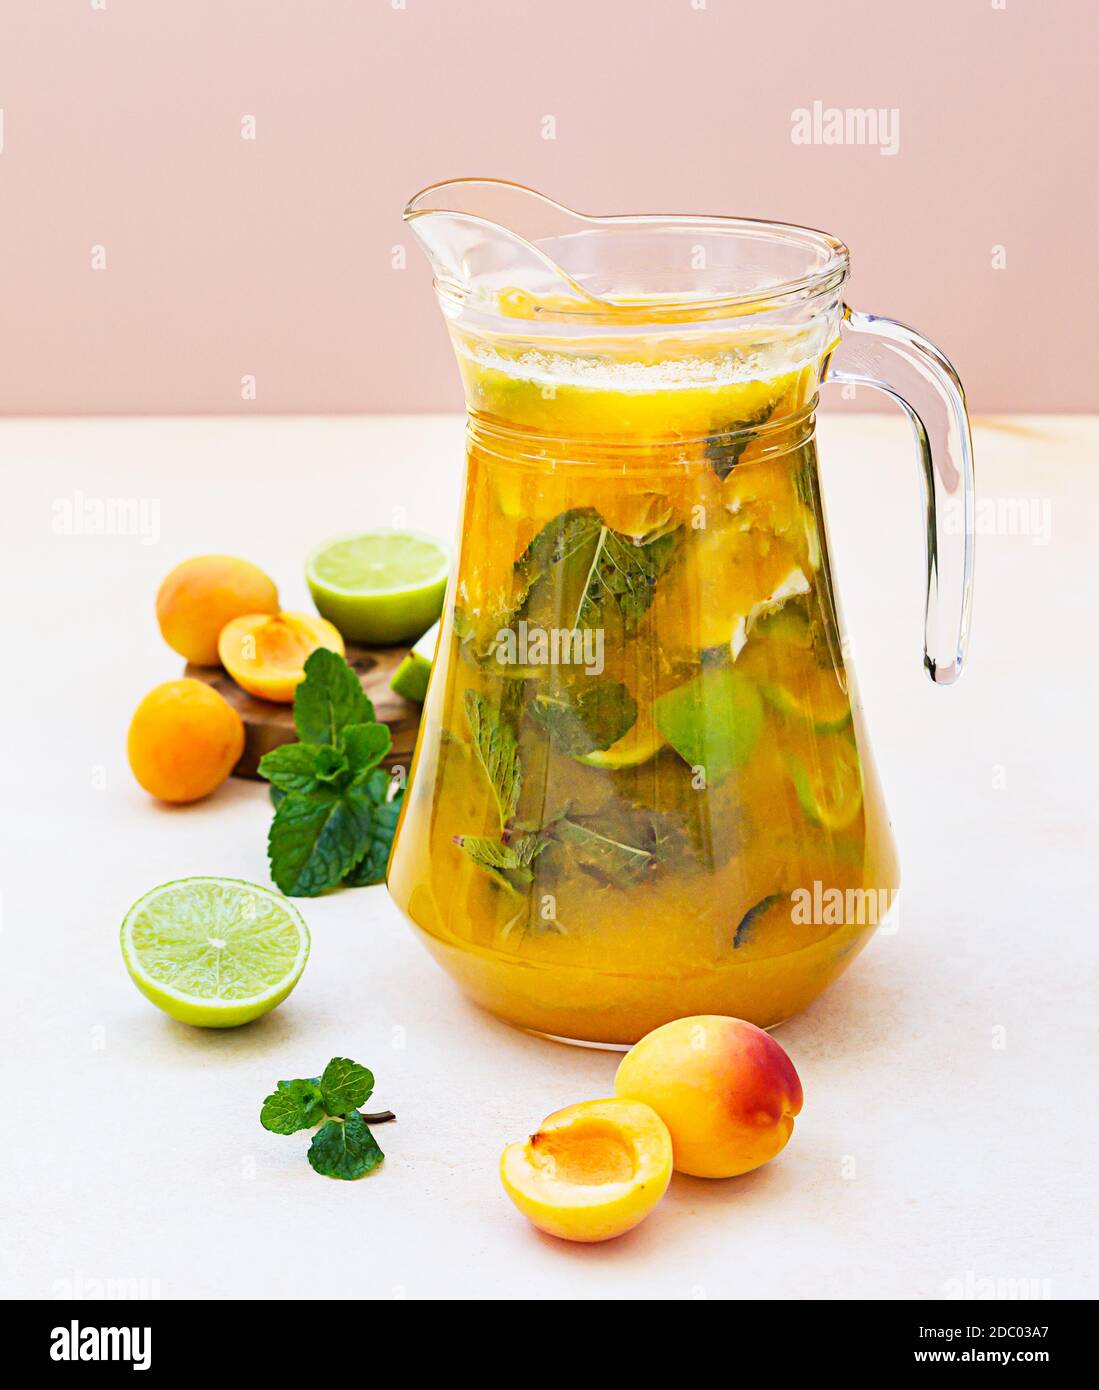 https://c8.alamy.com/comp/2DC03A7/apricot-cocktail-or-ice-tea-with-fresh-mint-lime-and-apricots-summer-refreshing-cold-drink-light-background-2DC03A7.jpg